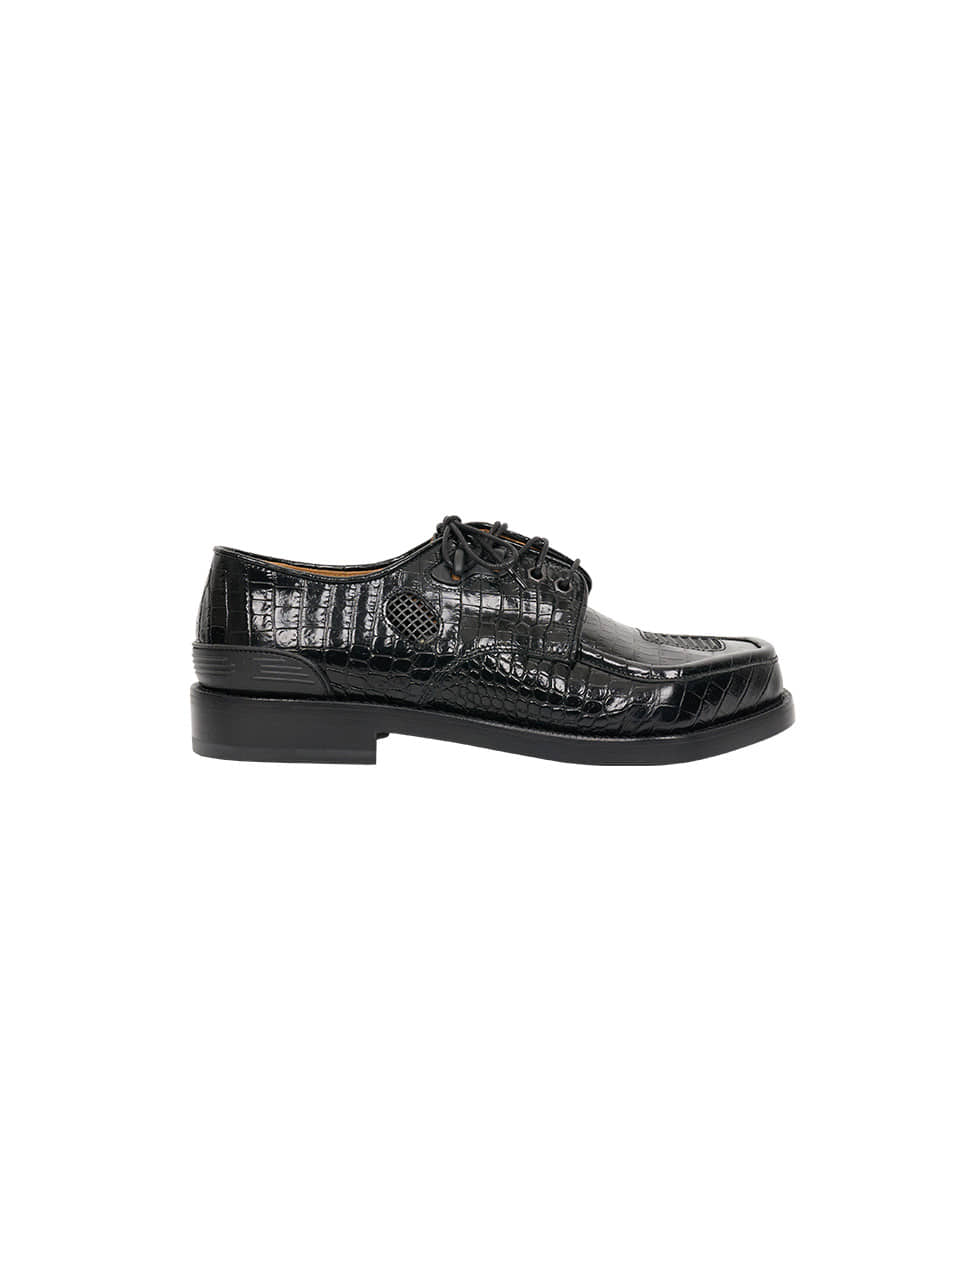 MAGLIANO - GIGER MOSTER DERBY SHOES (BLACK)